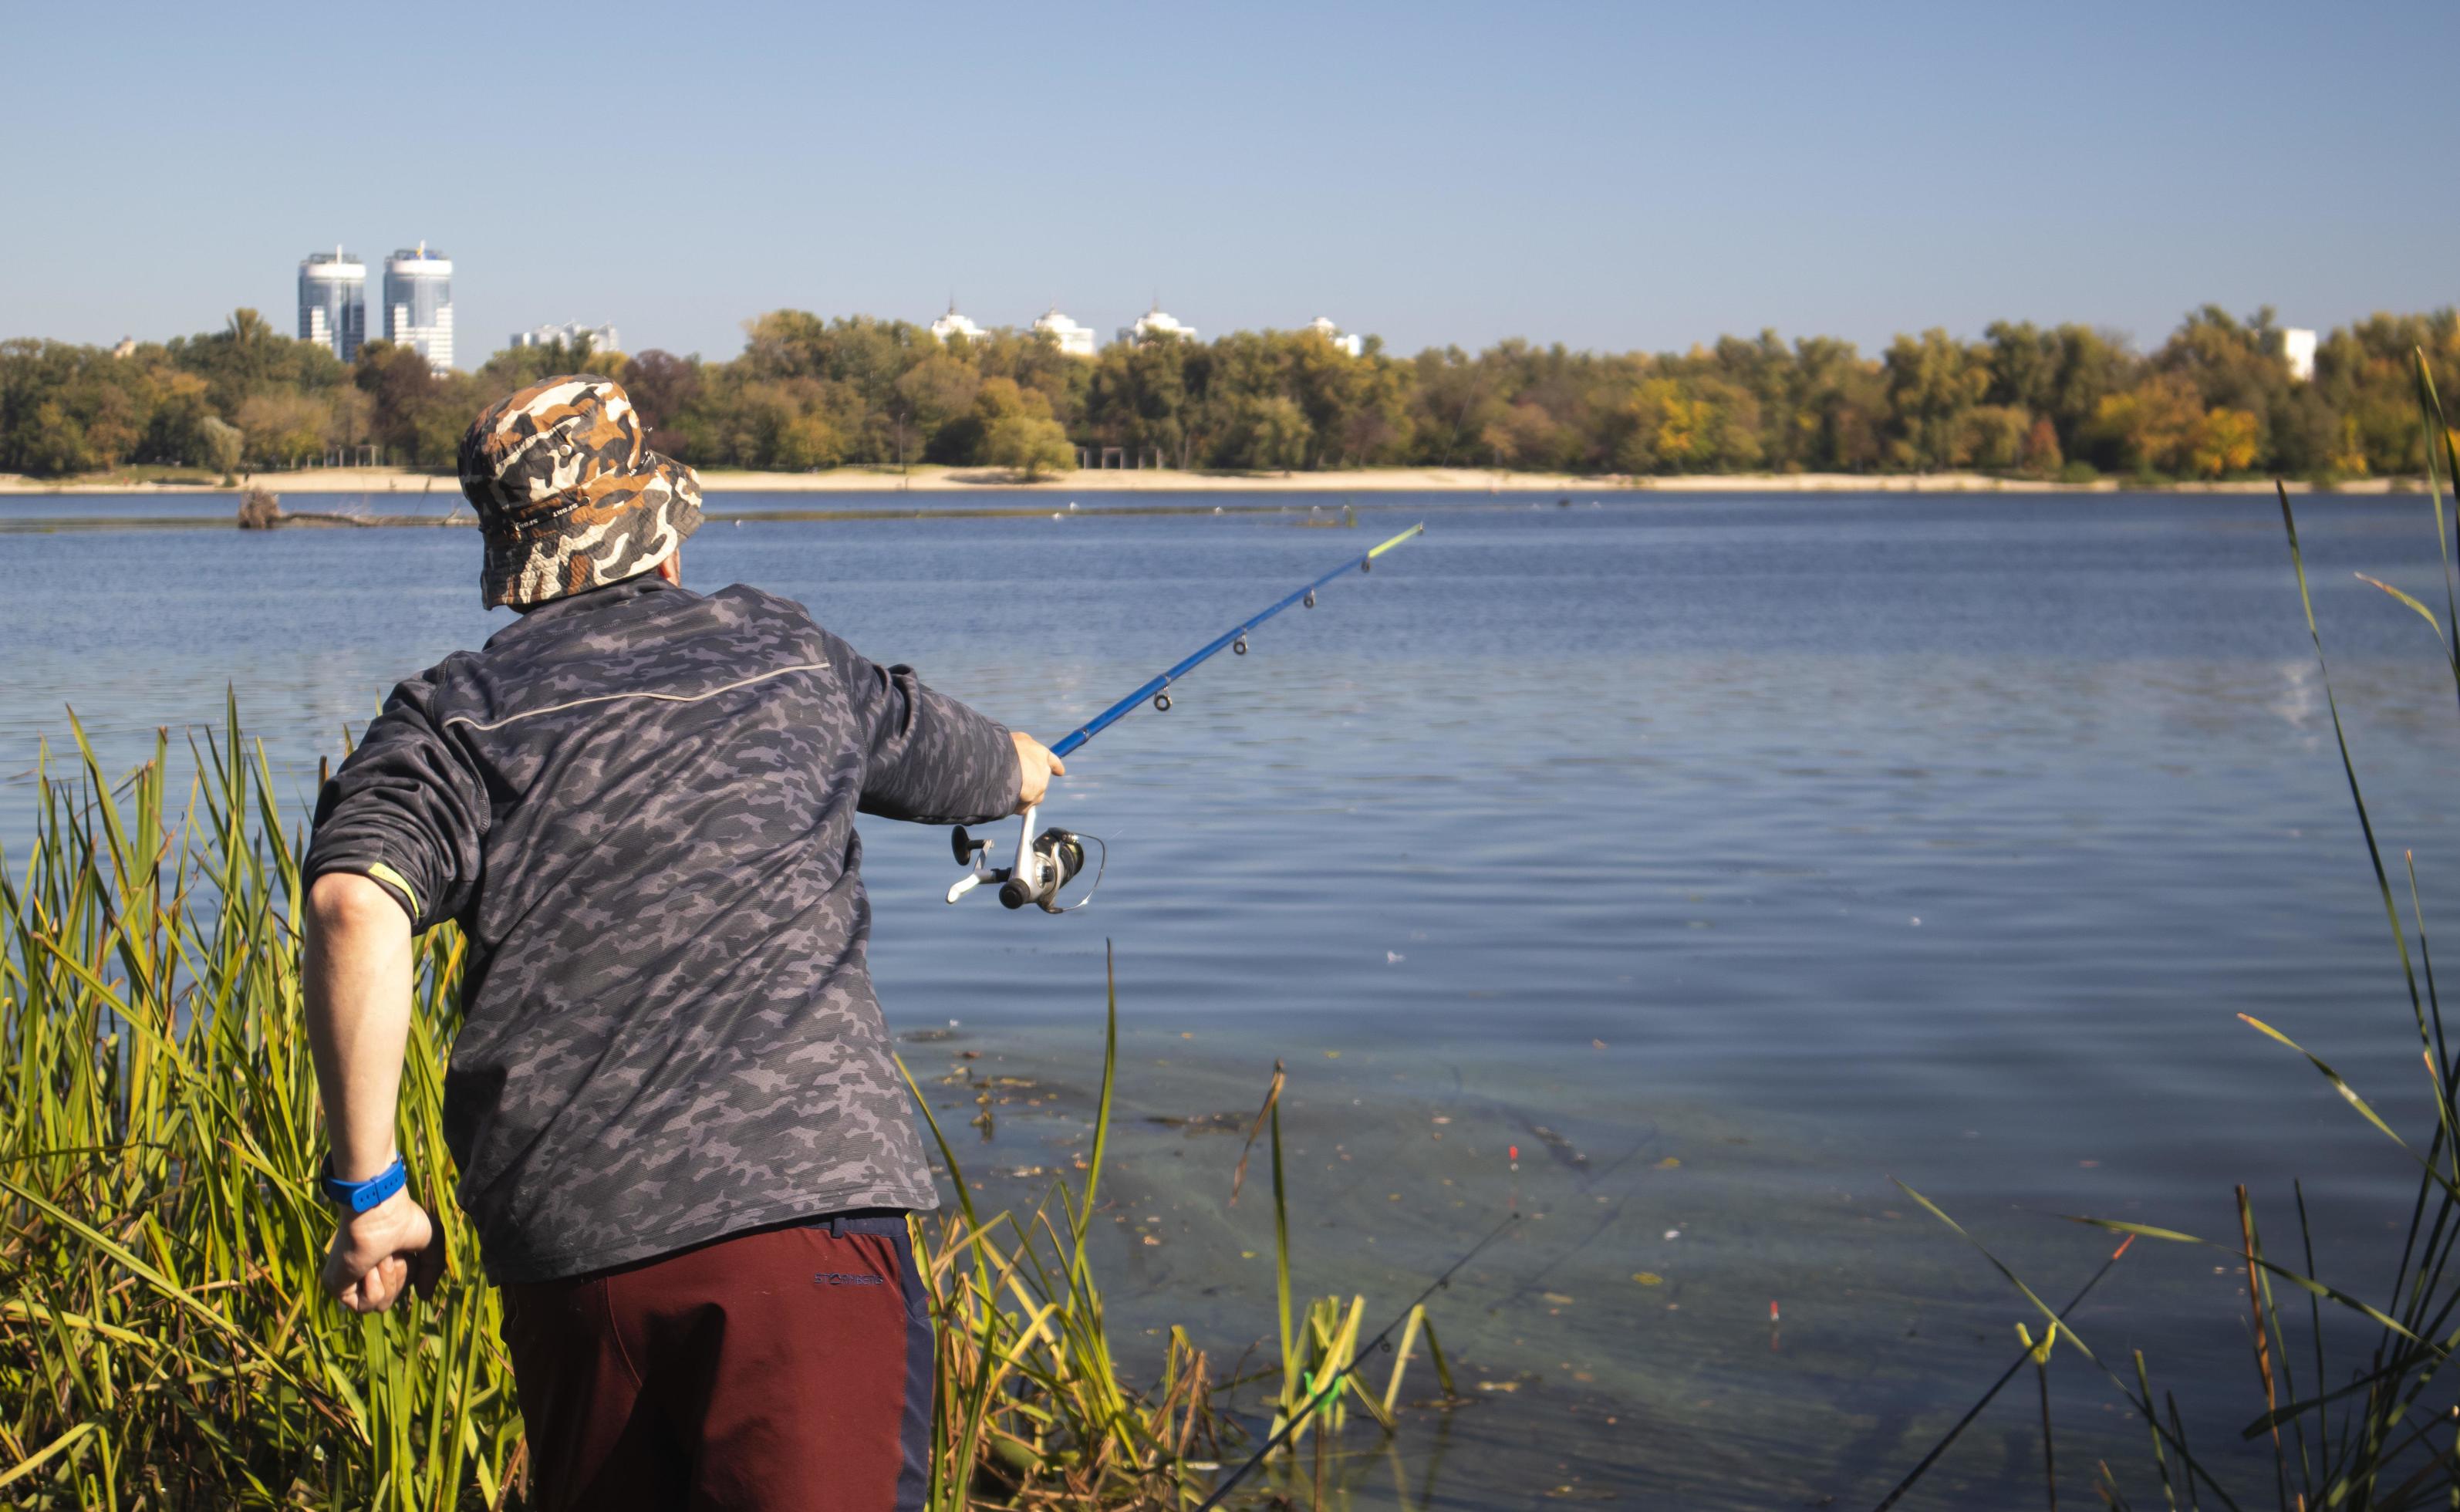 A male fisherman threw a spinning rod into a lake or river on a